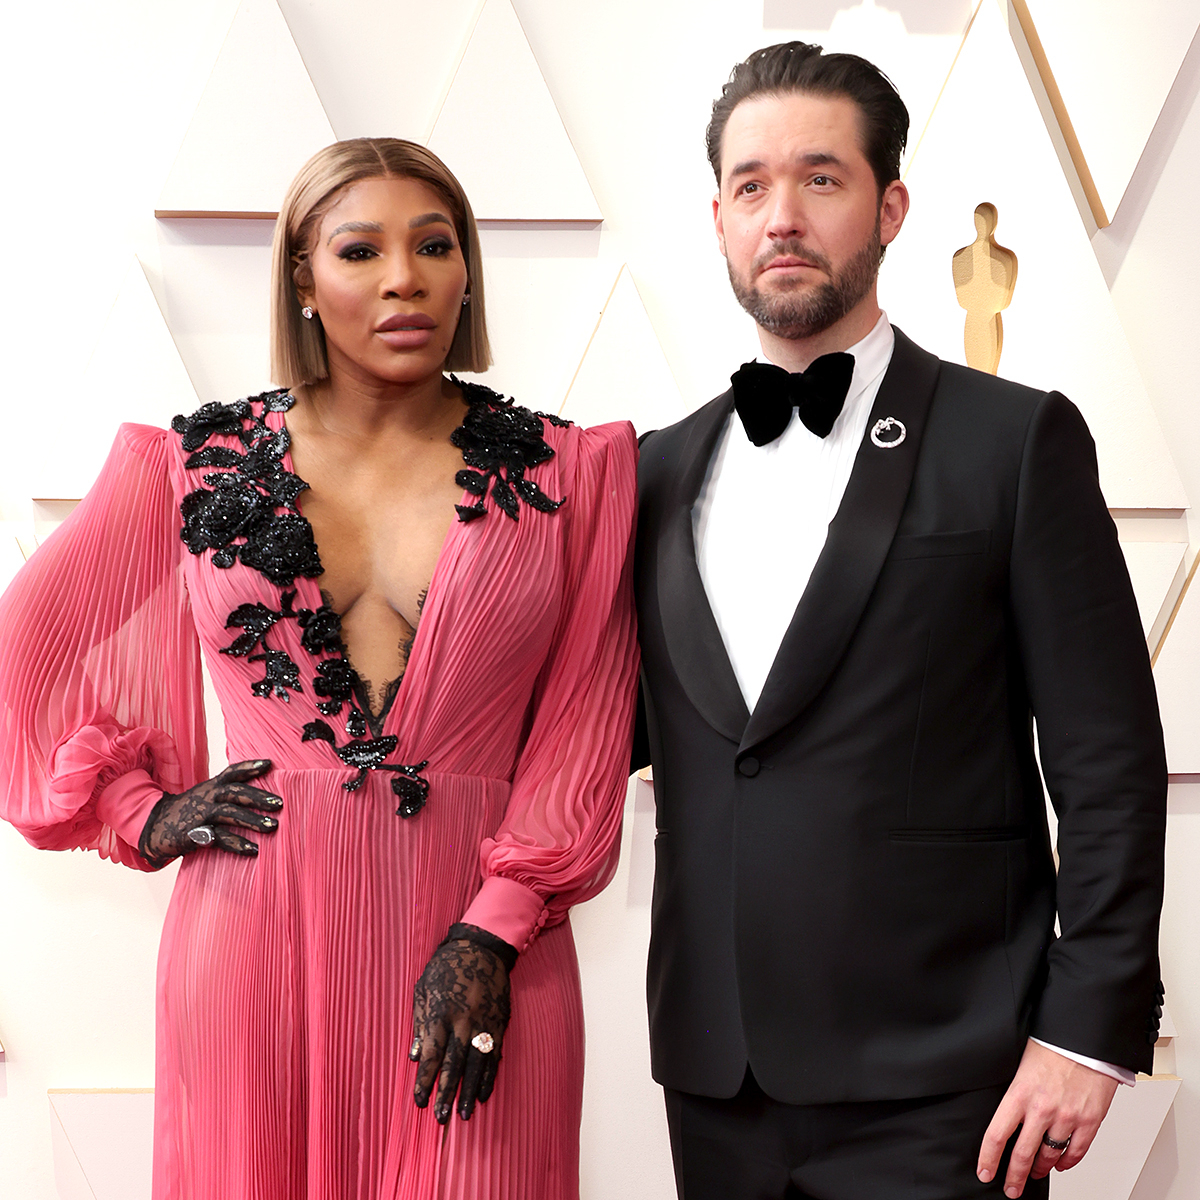 Serena Williams Shares Plans for Baby No. 2 After Retirement